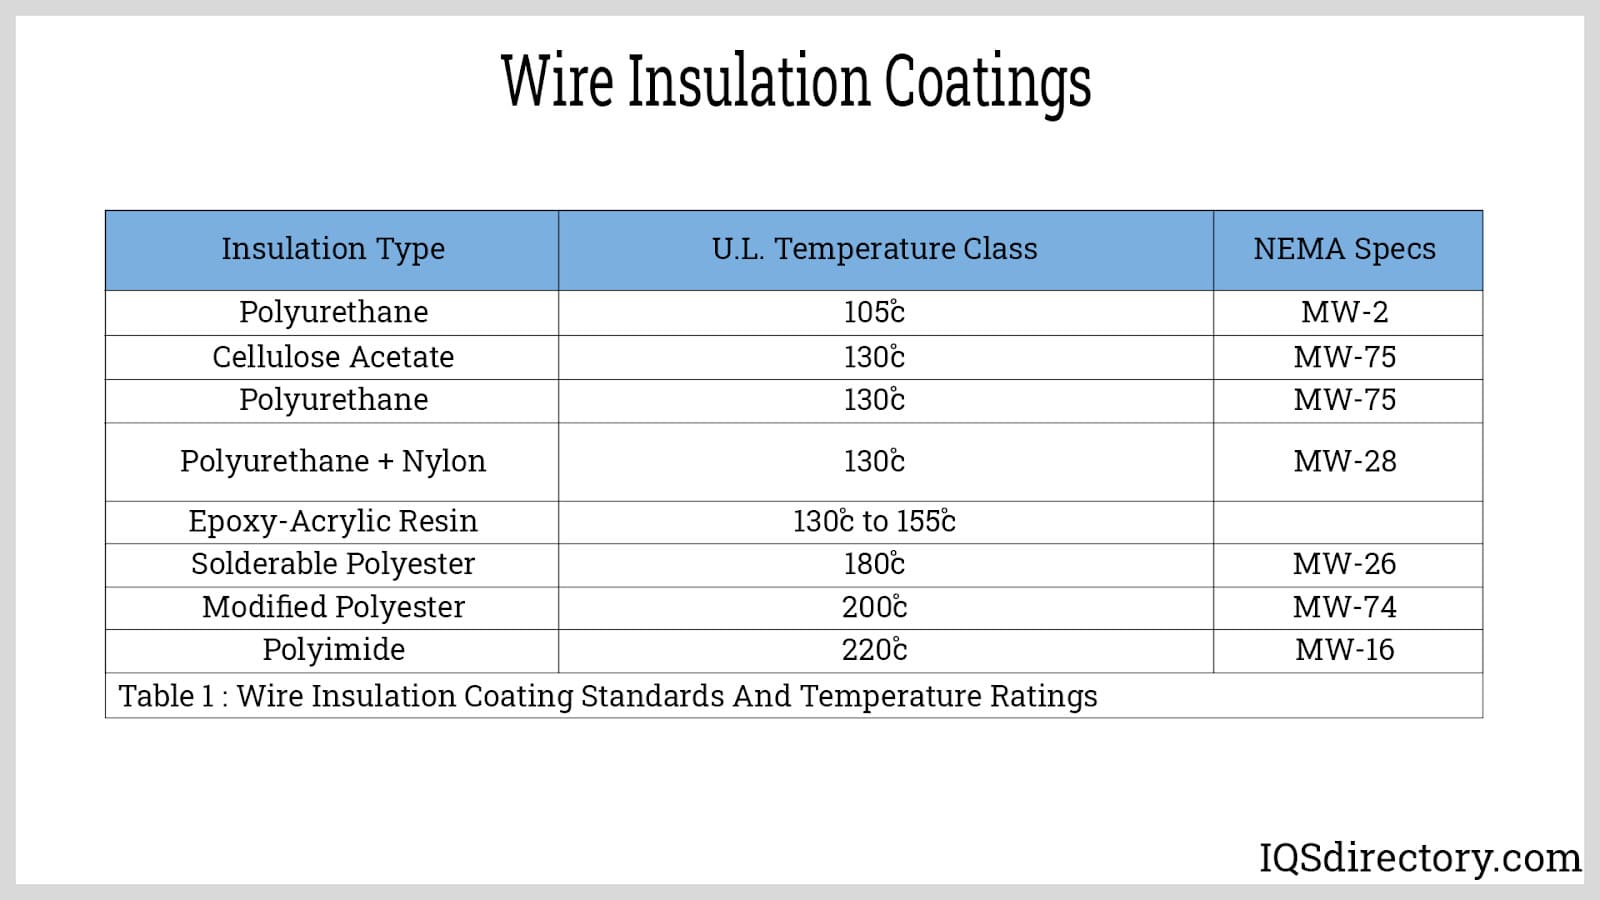 Wire Insulation Coatings